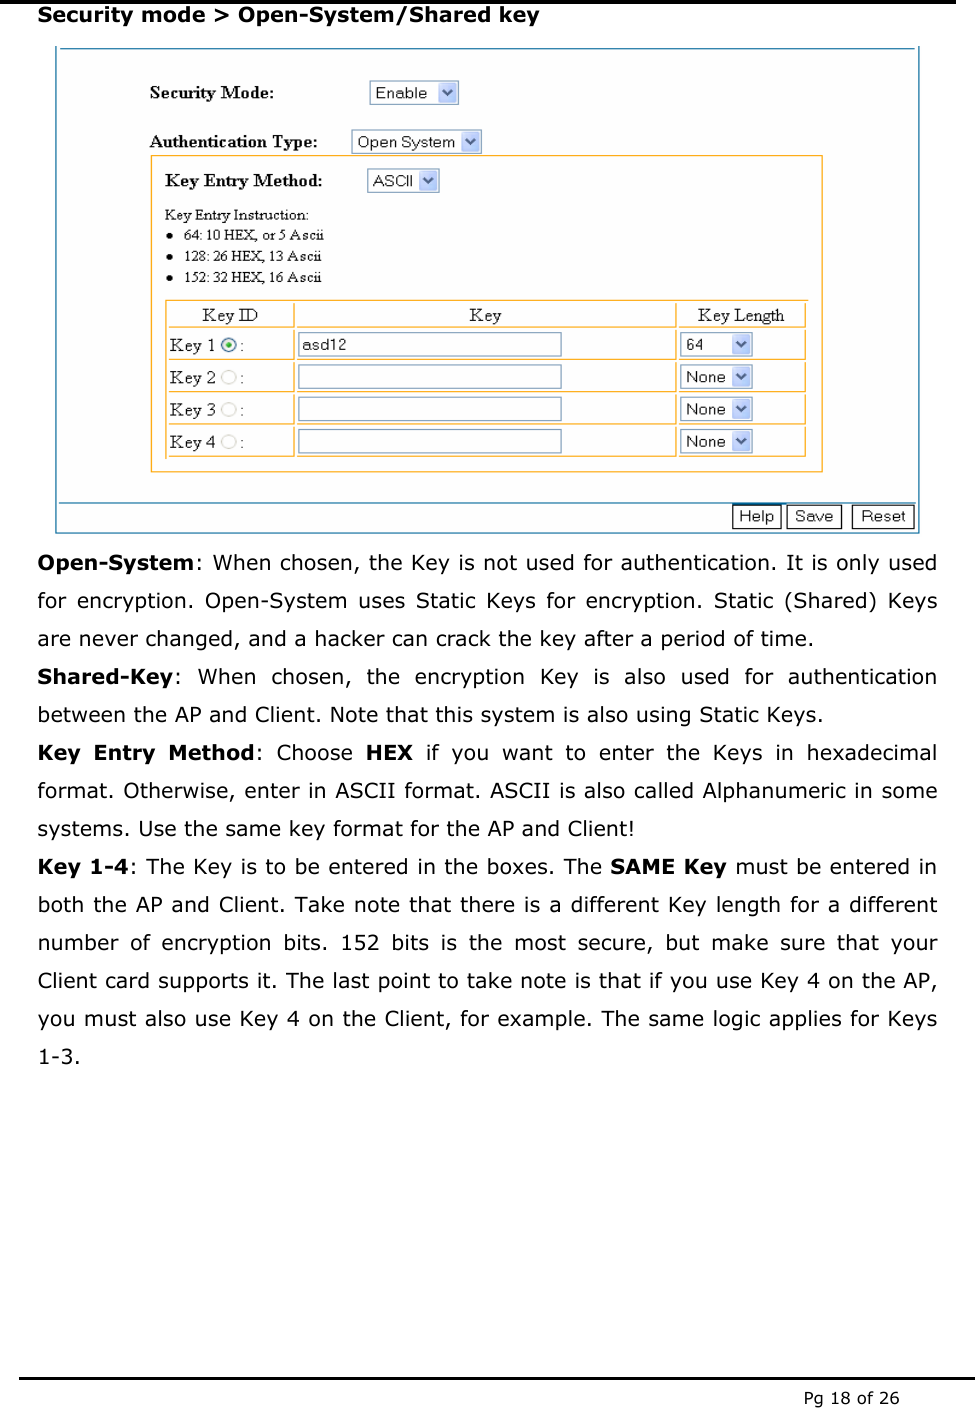  Pg 18 of 26 Security mode &gt; Open-System/Shared key  Open-System: When chosen, the Key is not used for authentication. It is only used for encryption. Open-System uses Static Keys for encryption. Static (Shared) Keys are never changed, and a hacker can crack the key after a period of time. Shared-Key: When chosen, the encryption Key is also used for authentication between the AP and Client. Note that this system is also using Static Keys. Key Entry Method: Choose HEX if you want to enter the Keys in hexadecimal format. Otherwise, enter in ASCII format. ASCII is also called Alphanumeric in some systems. Use the same key format for the AP and Client! Key 1-4: The Key is to be entered in the boxes. The SAME Key must be entered in both the AP and Client. Take note that there is a different Key length for a different number of encryption bits. 152 bits is the most secure, but make sure that your Client card supports it. The last point to take note is that if you use Key 4 on the AP, you must also use Key 4 on the Client, for example. The same logic applies for Keys 1-3.        